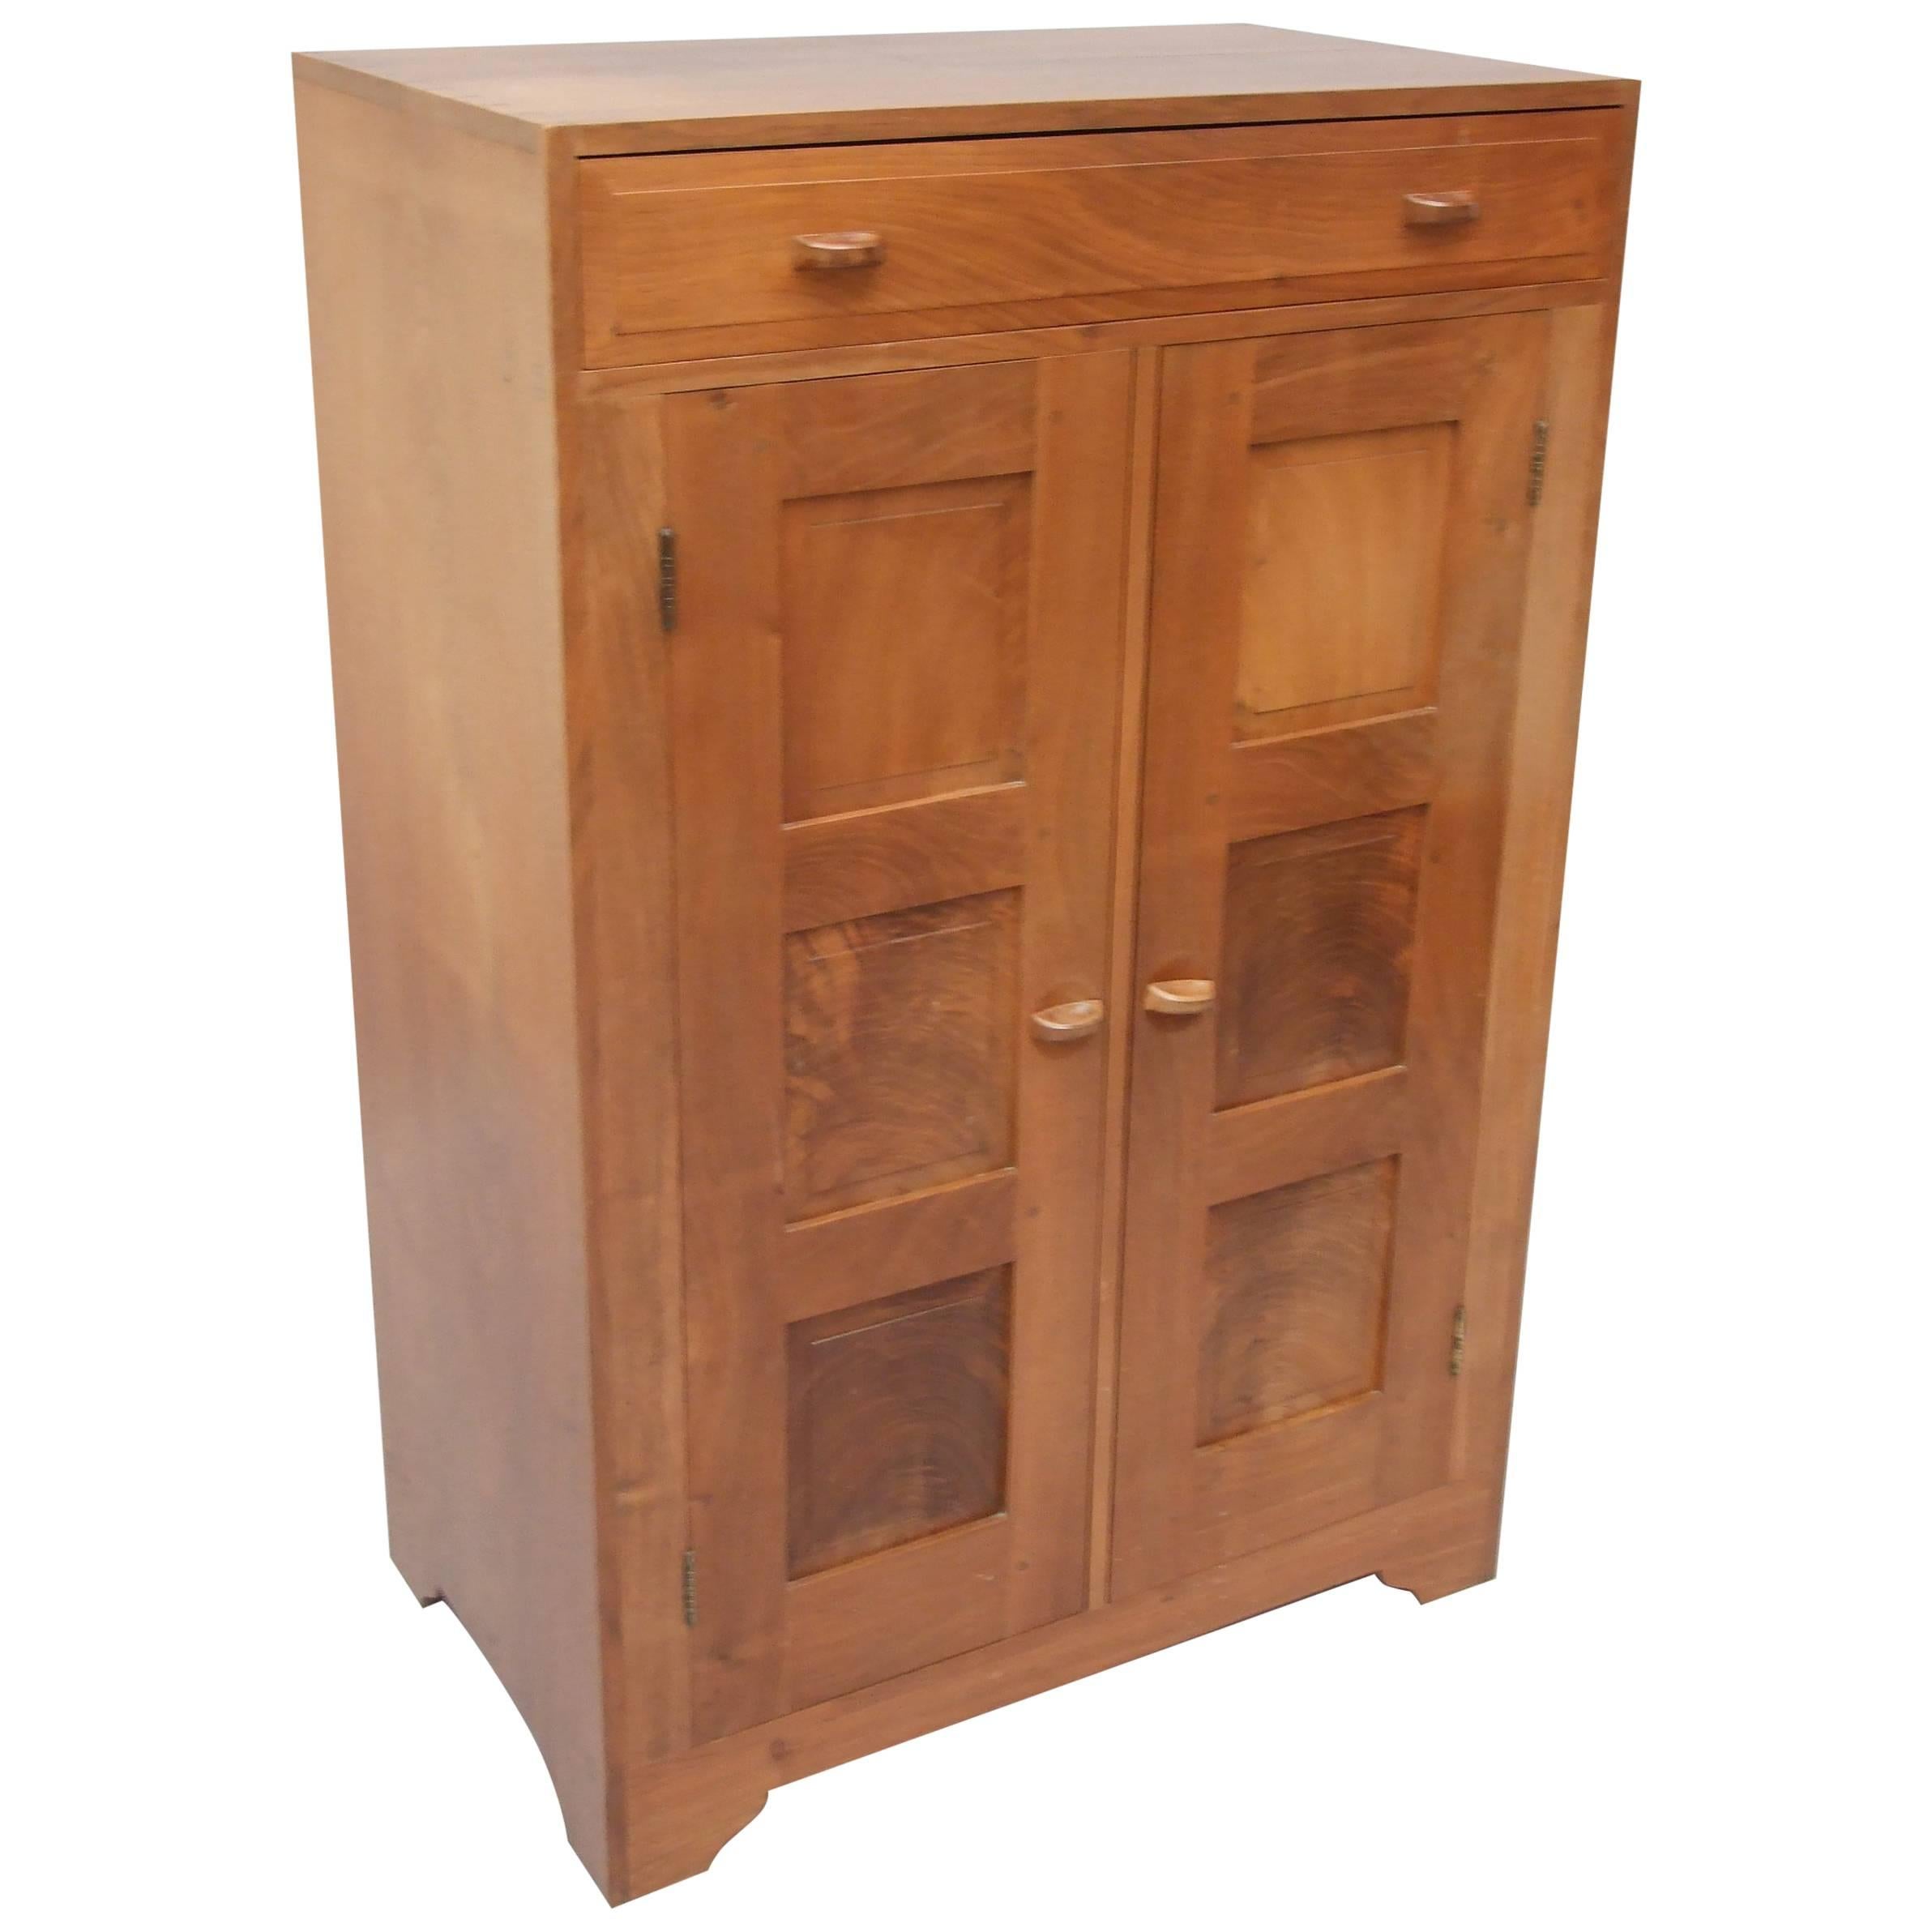 COTSWOLD Arts And Crafts Walnut Cabinet For Sale